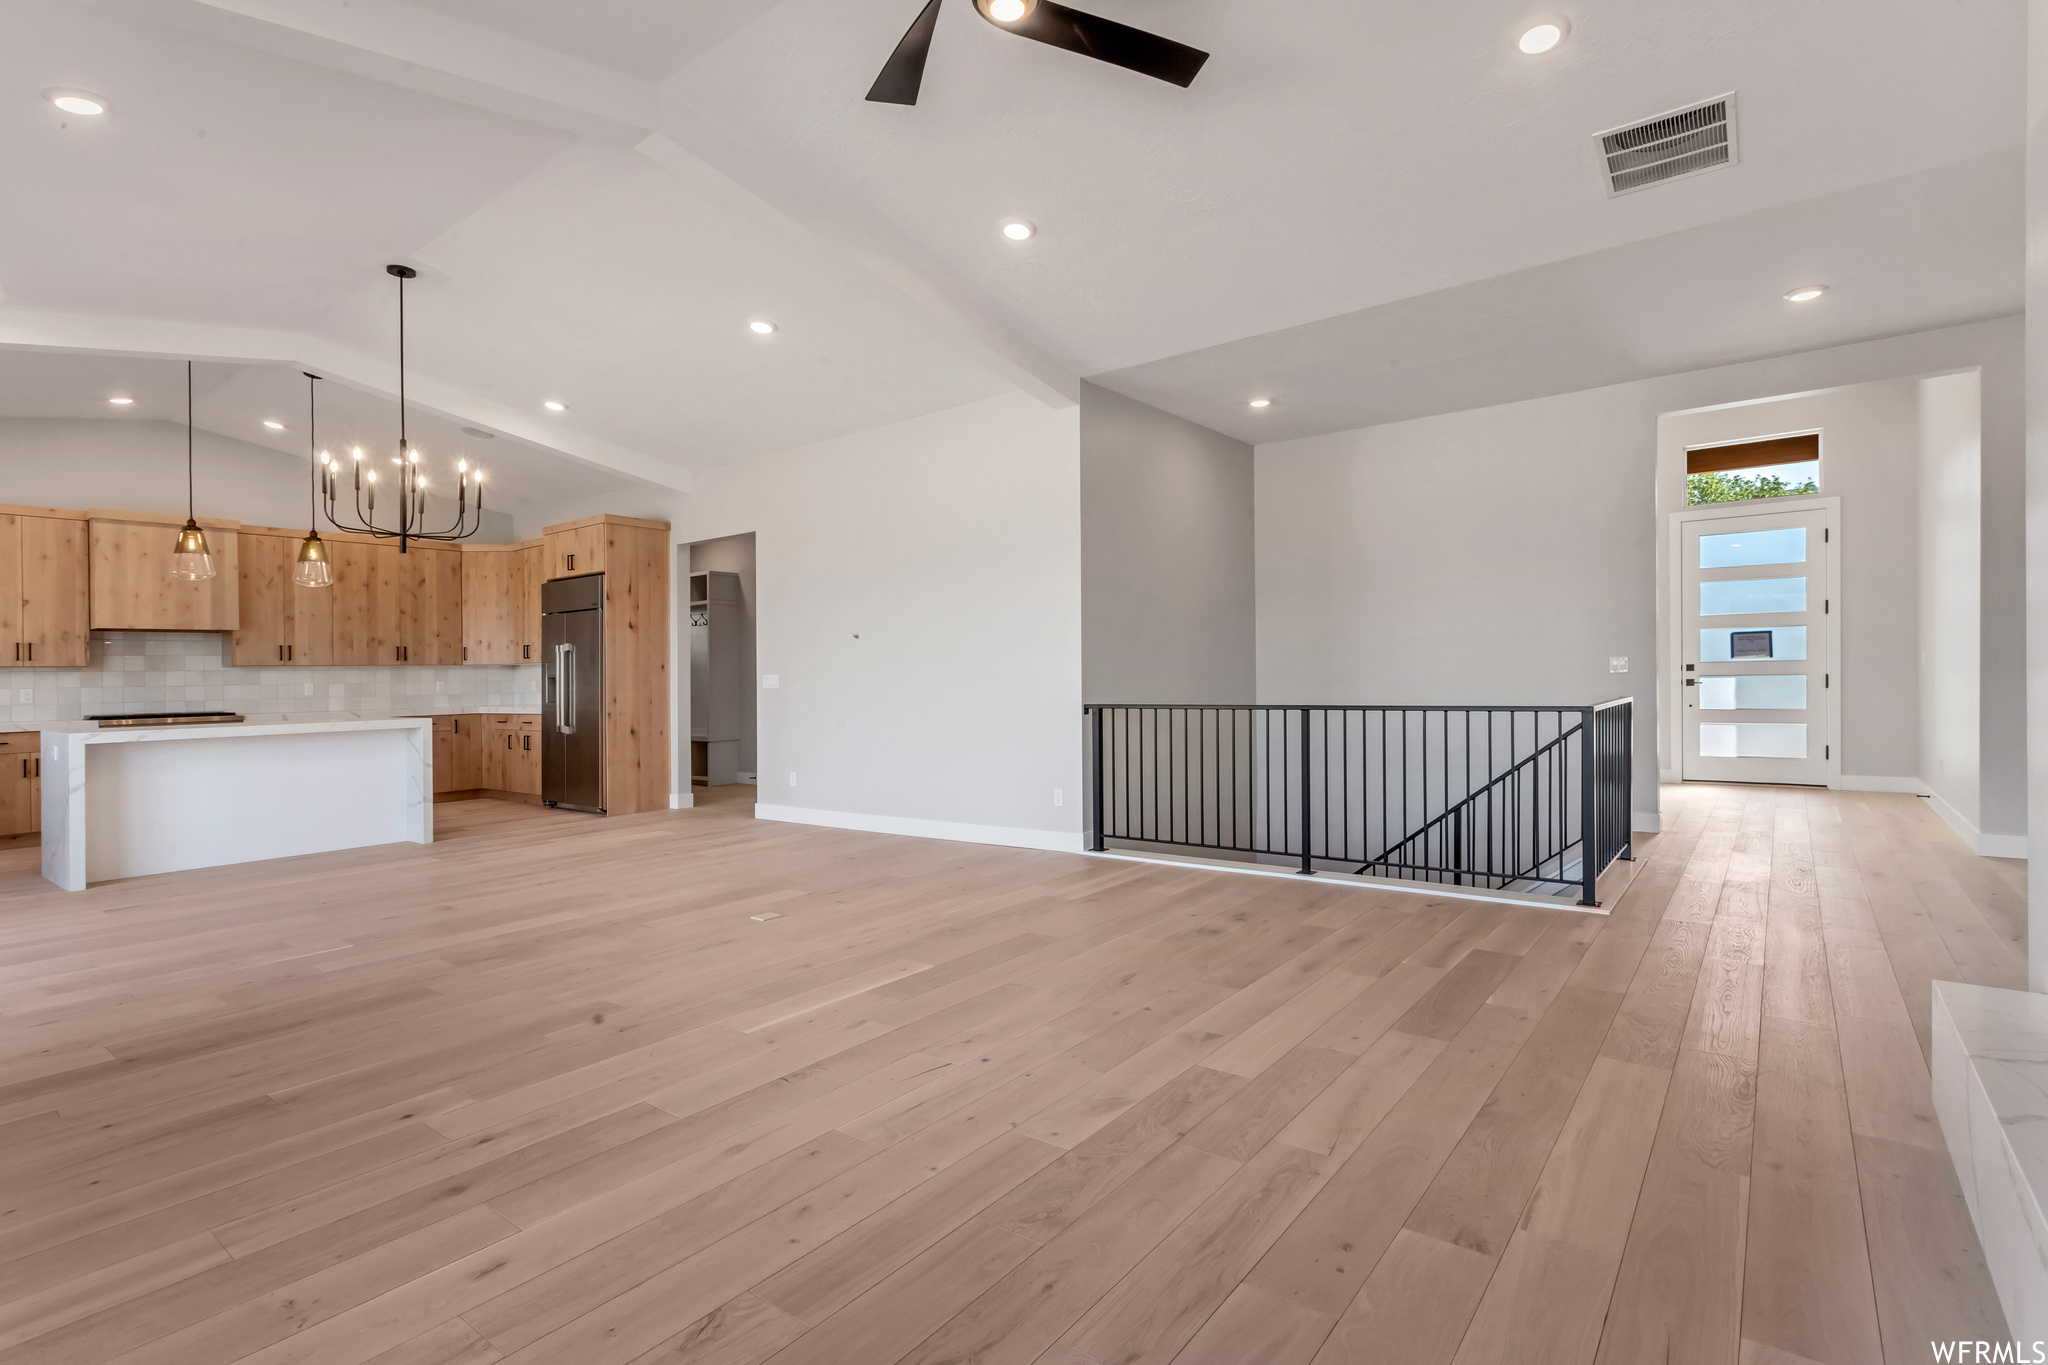 This home was upgraded with hardwood flooring throughout the main floor